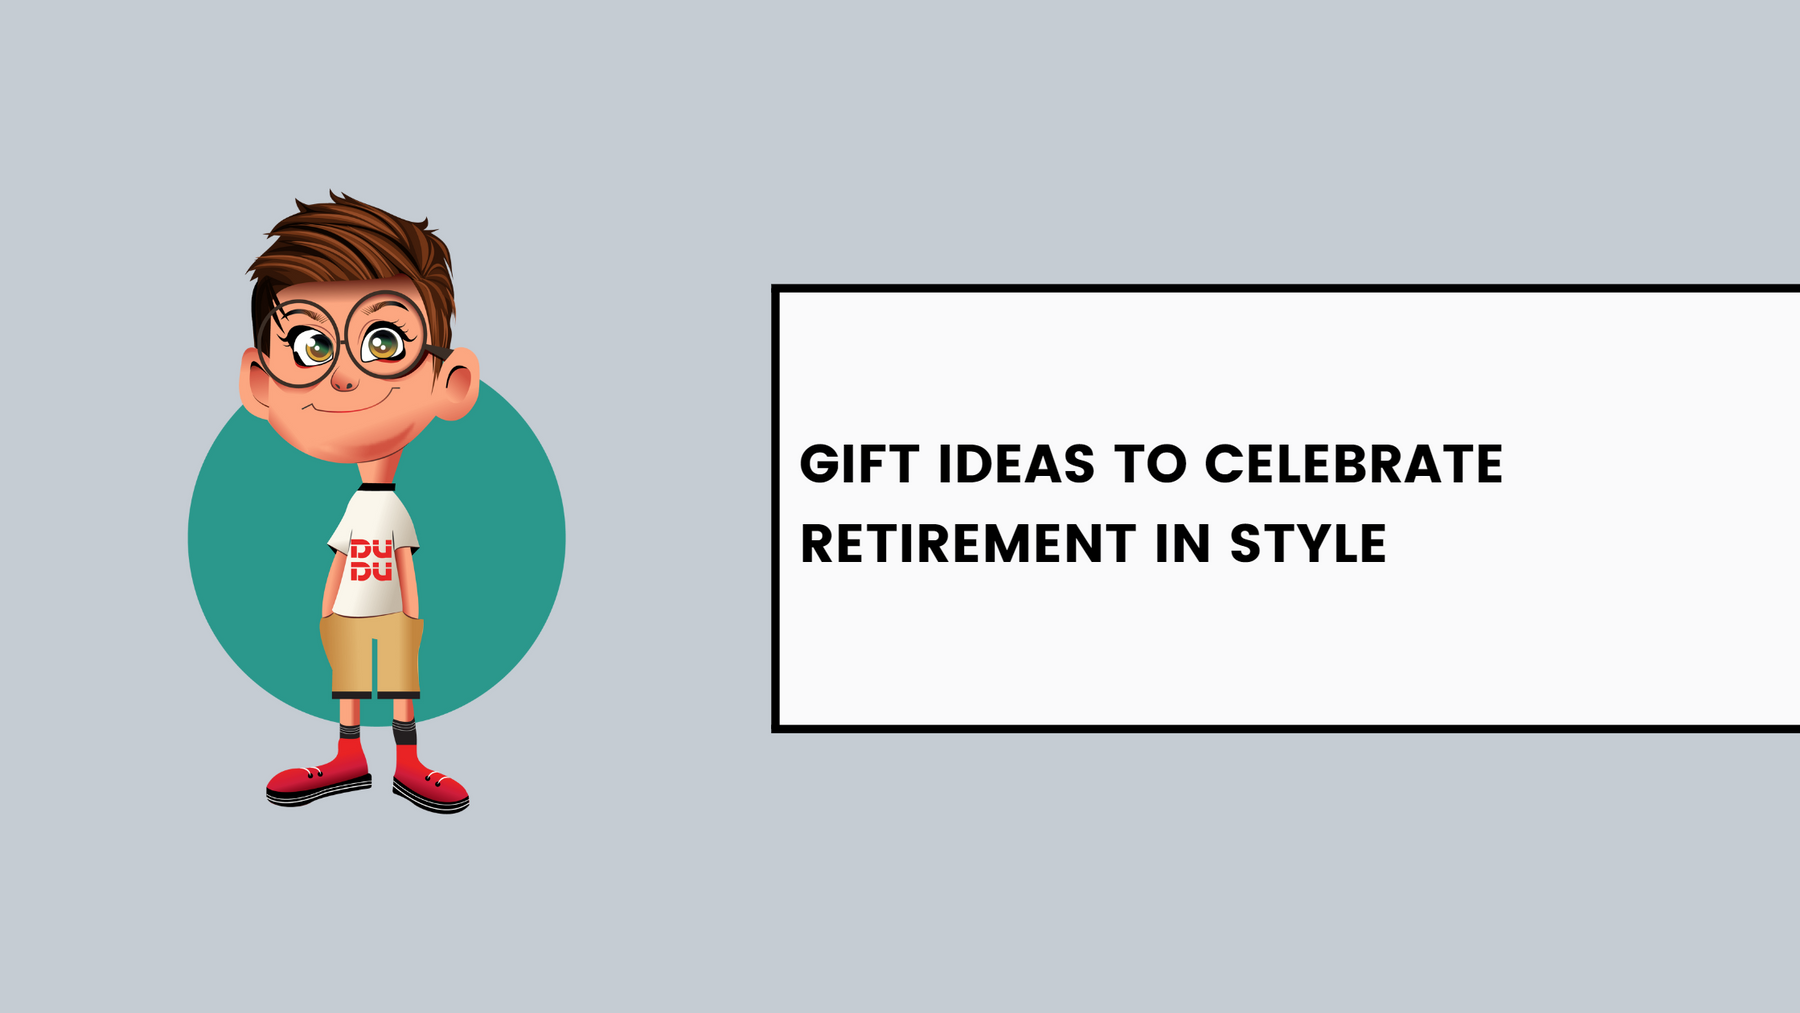 Gift Ideas to Celebrate Retirement in Style